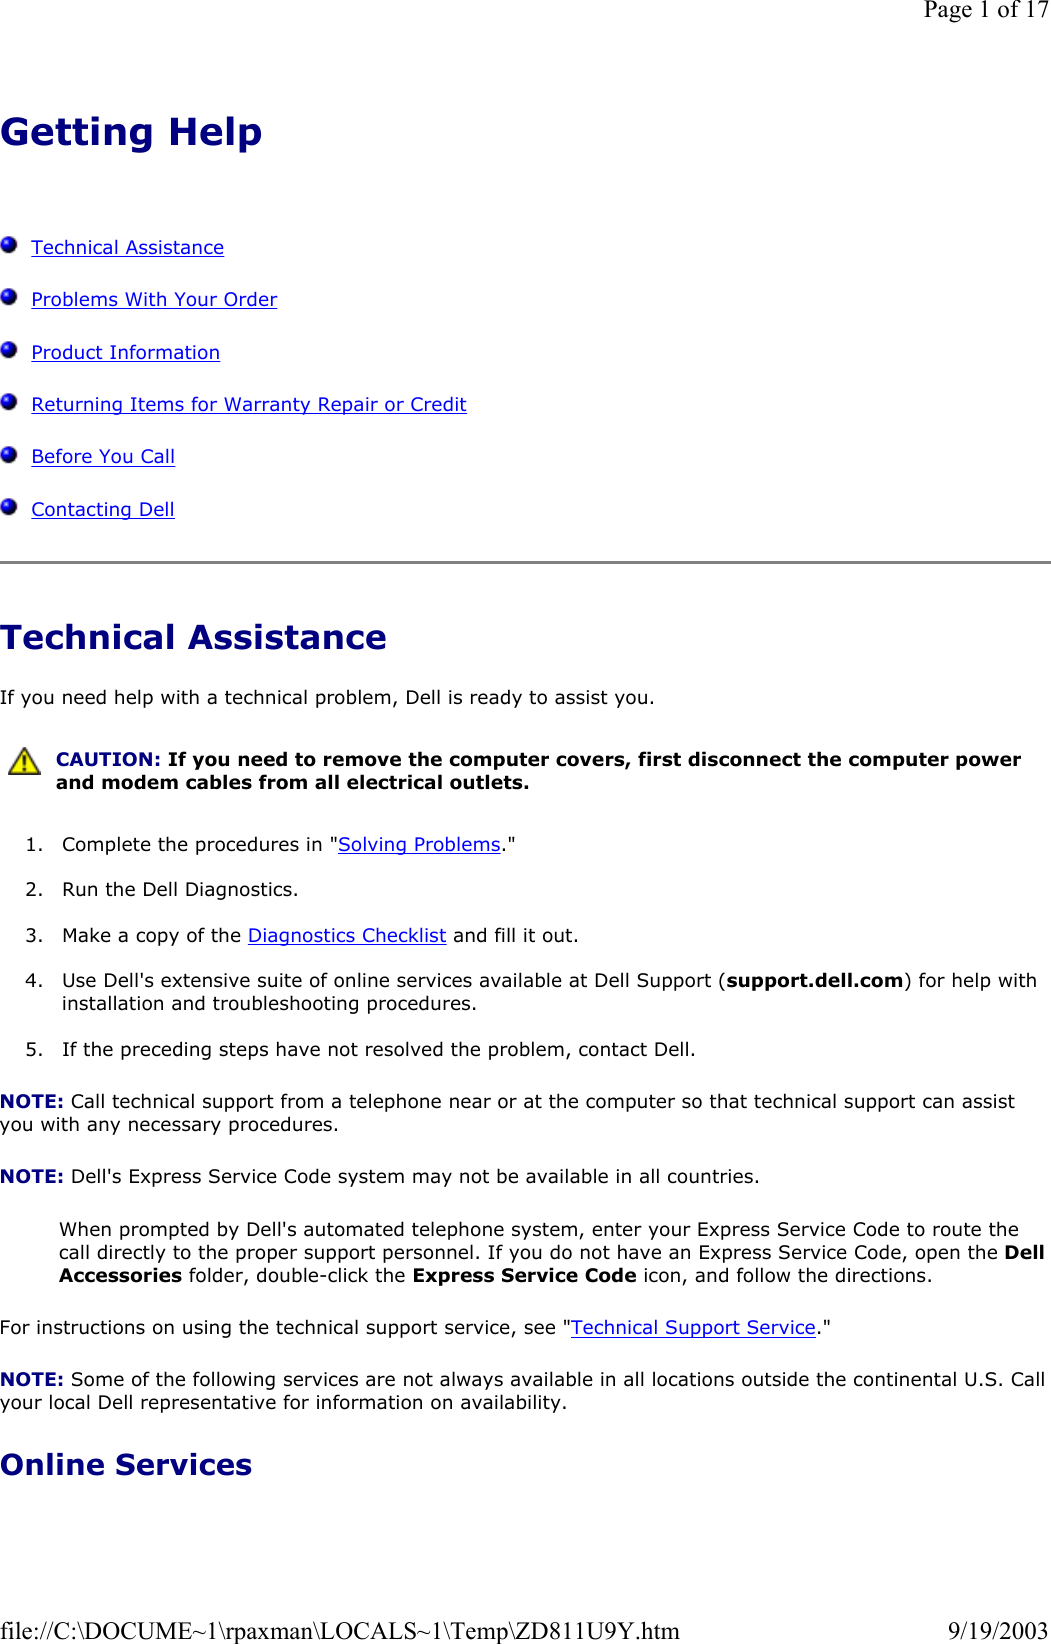 Getting Help      Technical Assistance   Problems With Your Order   Product Information   Returning Items for Warranty Repair or Credit   Before You Call   Contacting Dell Technical Assistance If you need help with a technical problem, Dell is ready to assist you. 1. Complete the procedures in &quot;Solving Problems.&quot;  2. Run the Dell Diagnostics.  3. Make a copy of the Diagnostics Checklist and fill it out.  4. Use Dell&apos;s extensive suite of online services available at Dell Support (support.dell.com) for help with installation and troubleshooting procedures.  5. If the preceding steps have not resolved the problem, contact Dell.  NOTE: Call technical support from a telephone near or at the computer so that technical support can assist you with any necessary procedures. NOTE: Dell&apos;s Express Service Code system may not be available in all countries. When prompted by Dell&apos;s automated telephone system, enter your Express Service Code to route the call directly to the proper support personnel. If you do not have an Express Service Code, open the Dell Accessories folder, double-click the Express Service Code icon, and follow the directions. For instructions on using the technical support service, see &quot;Technical Support Service.&quot; NOTE: Some of the following services are not always available in all locations outside the continental U.S. Call your local Dell representative for information on availability. Online Services  CAUTION: If you need to remove the computer covers, first disconnect the computer power and modem cables from all electrical outlets. Page 1 of 179/19/2003file://C:\DOCUME~1\rpaxman\LOCALS~1\Temp\ZD811U9Y.htm